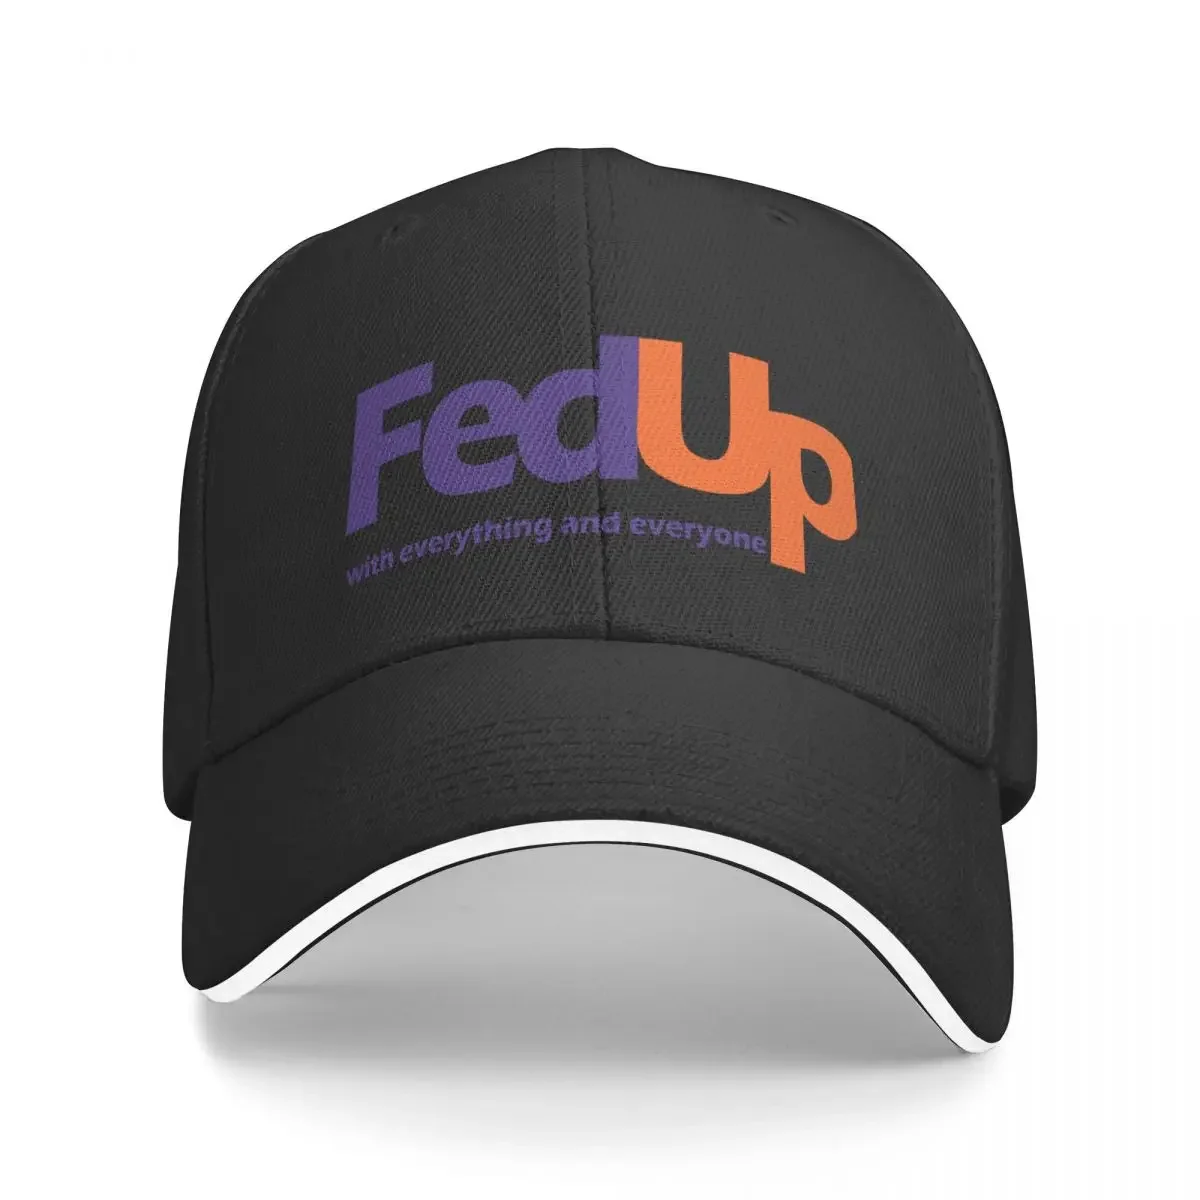 

fed up with everything and everyone Baseball Cap black dad hat tea Hat Golf Men Women's